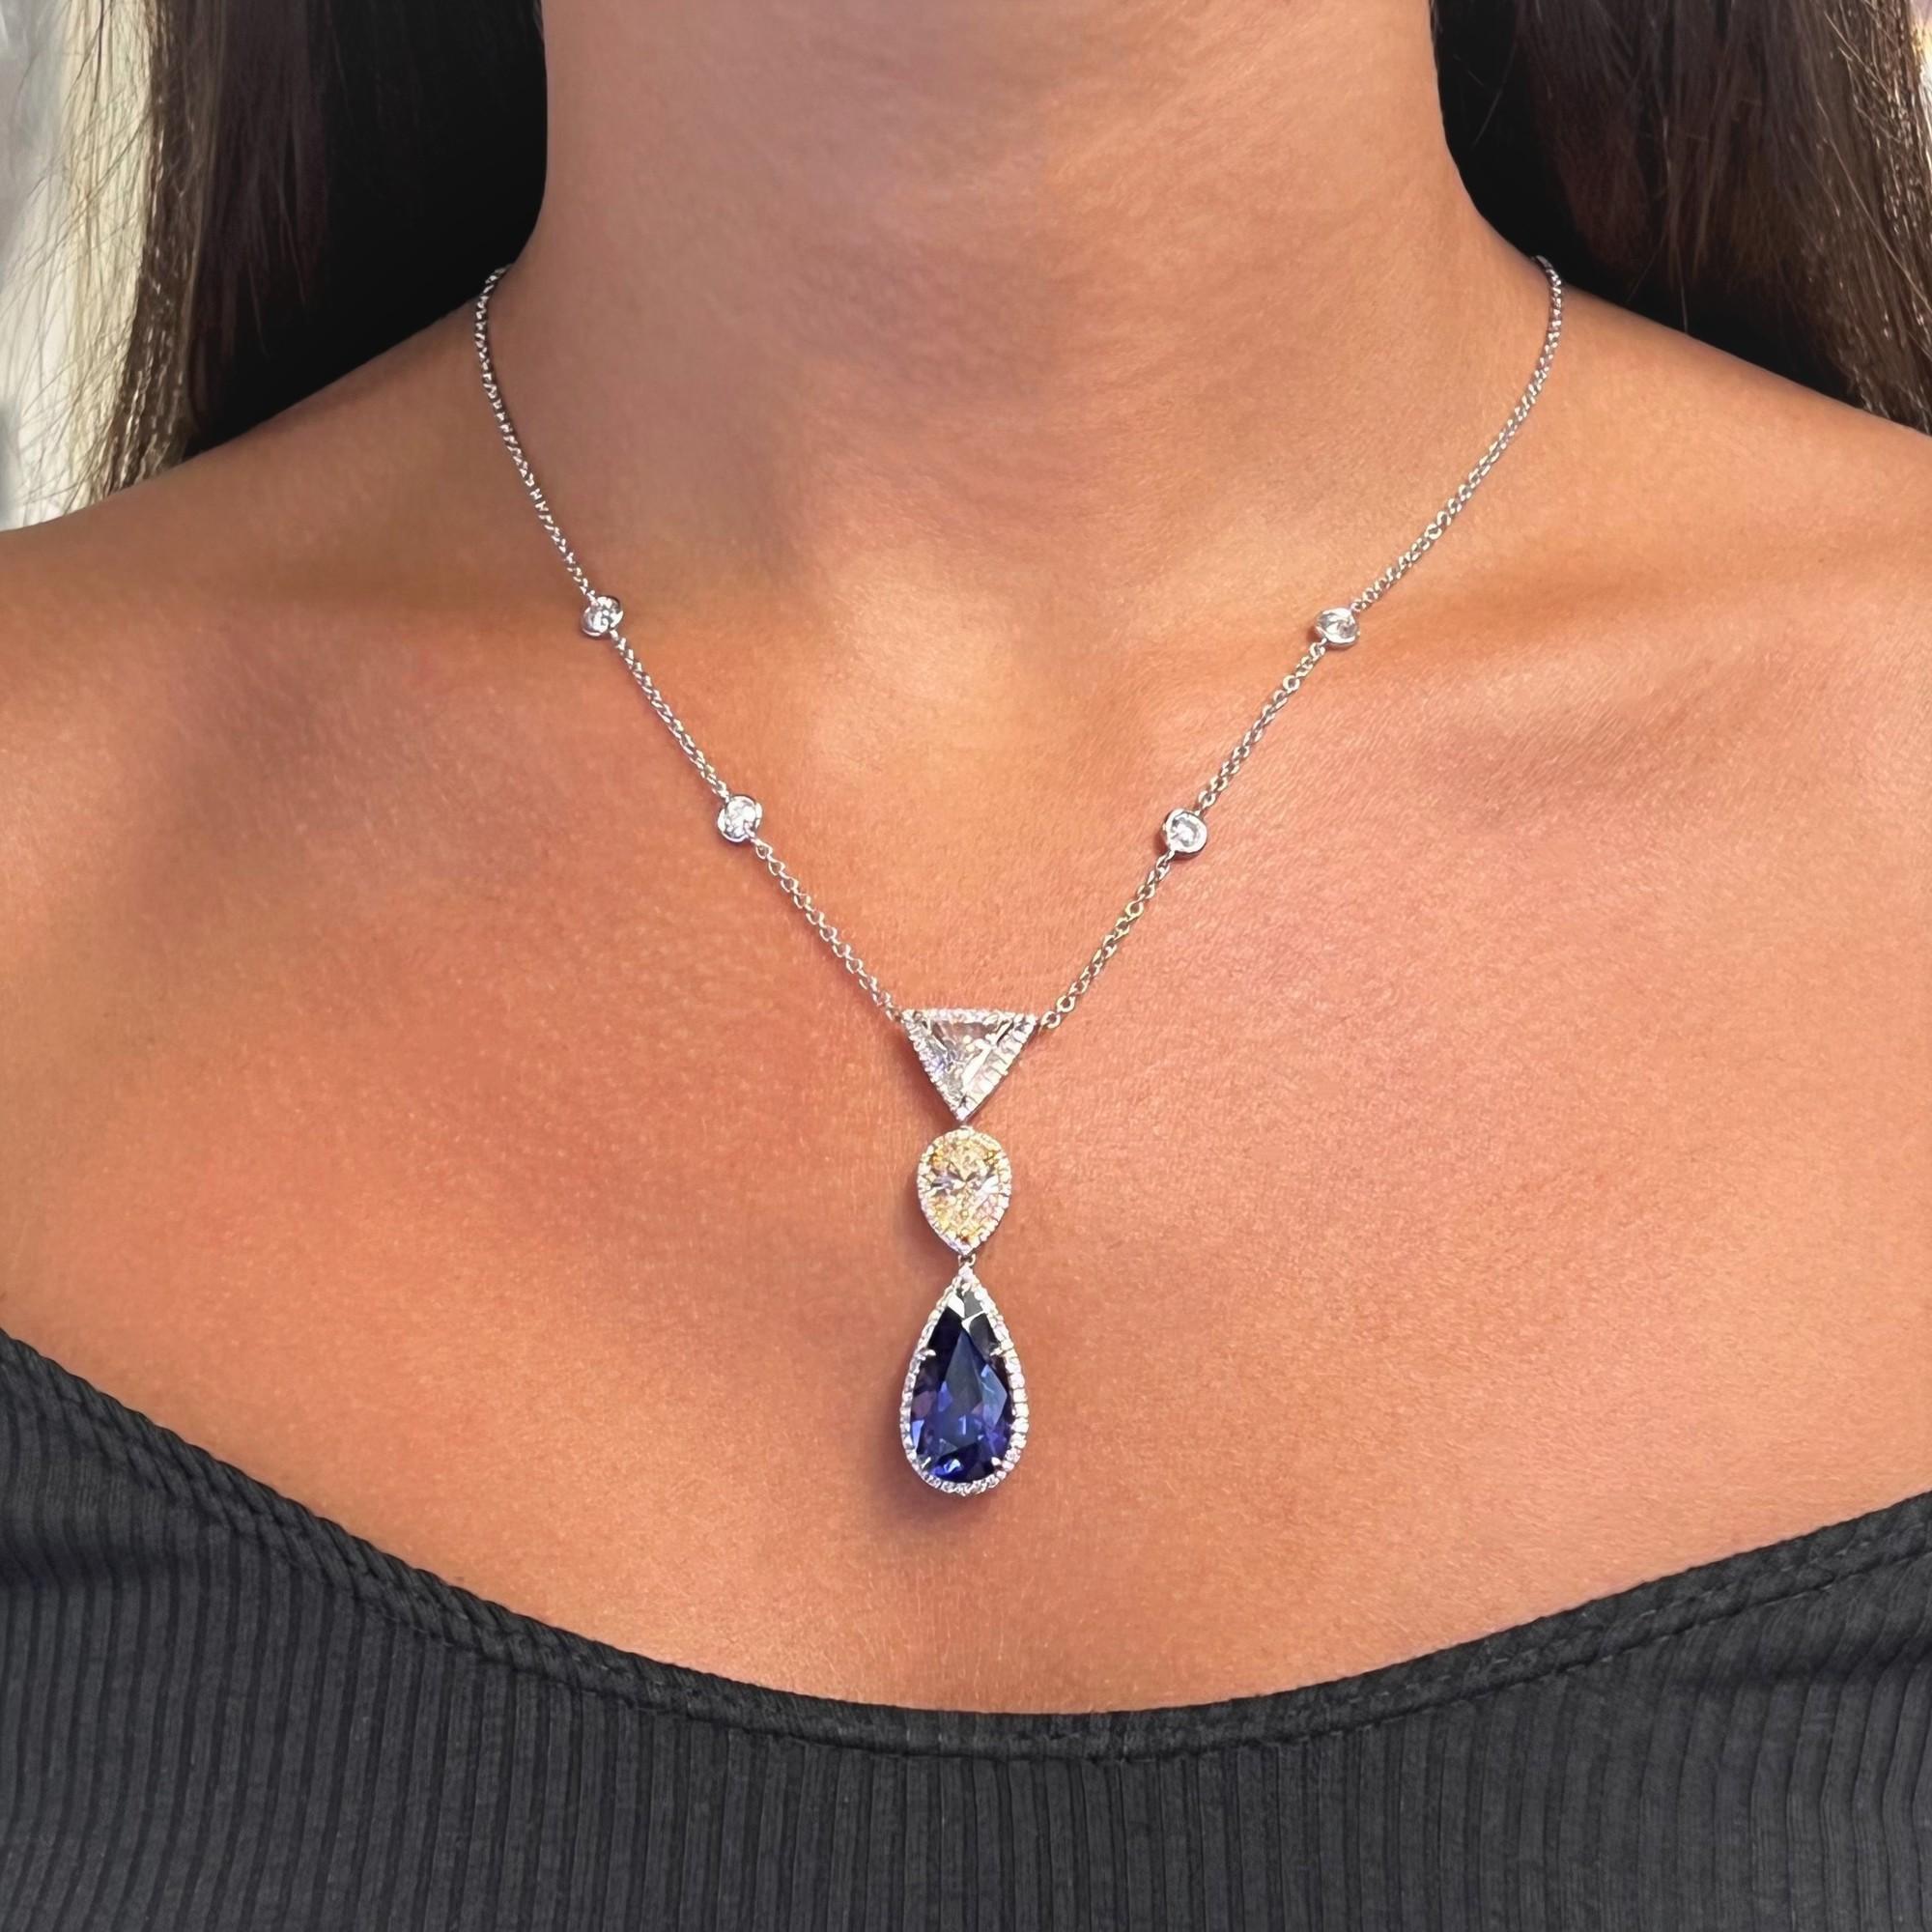 10.34Cttw Tanzanite & 3.84Cttw Diamond Drop Pendant Necklace 18K White Gold In New Condition For Sale In New York, NY